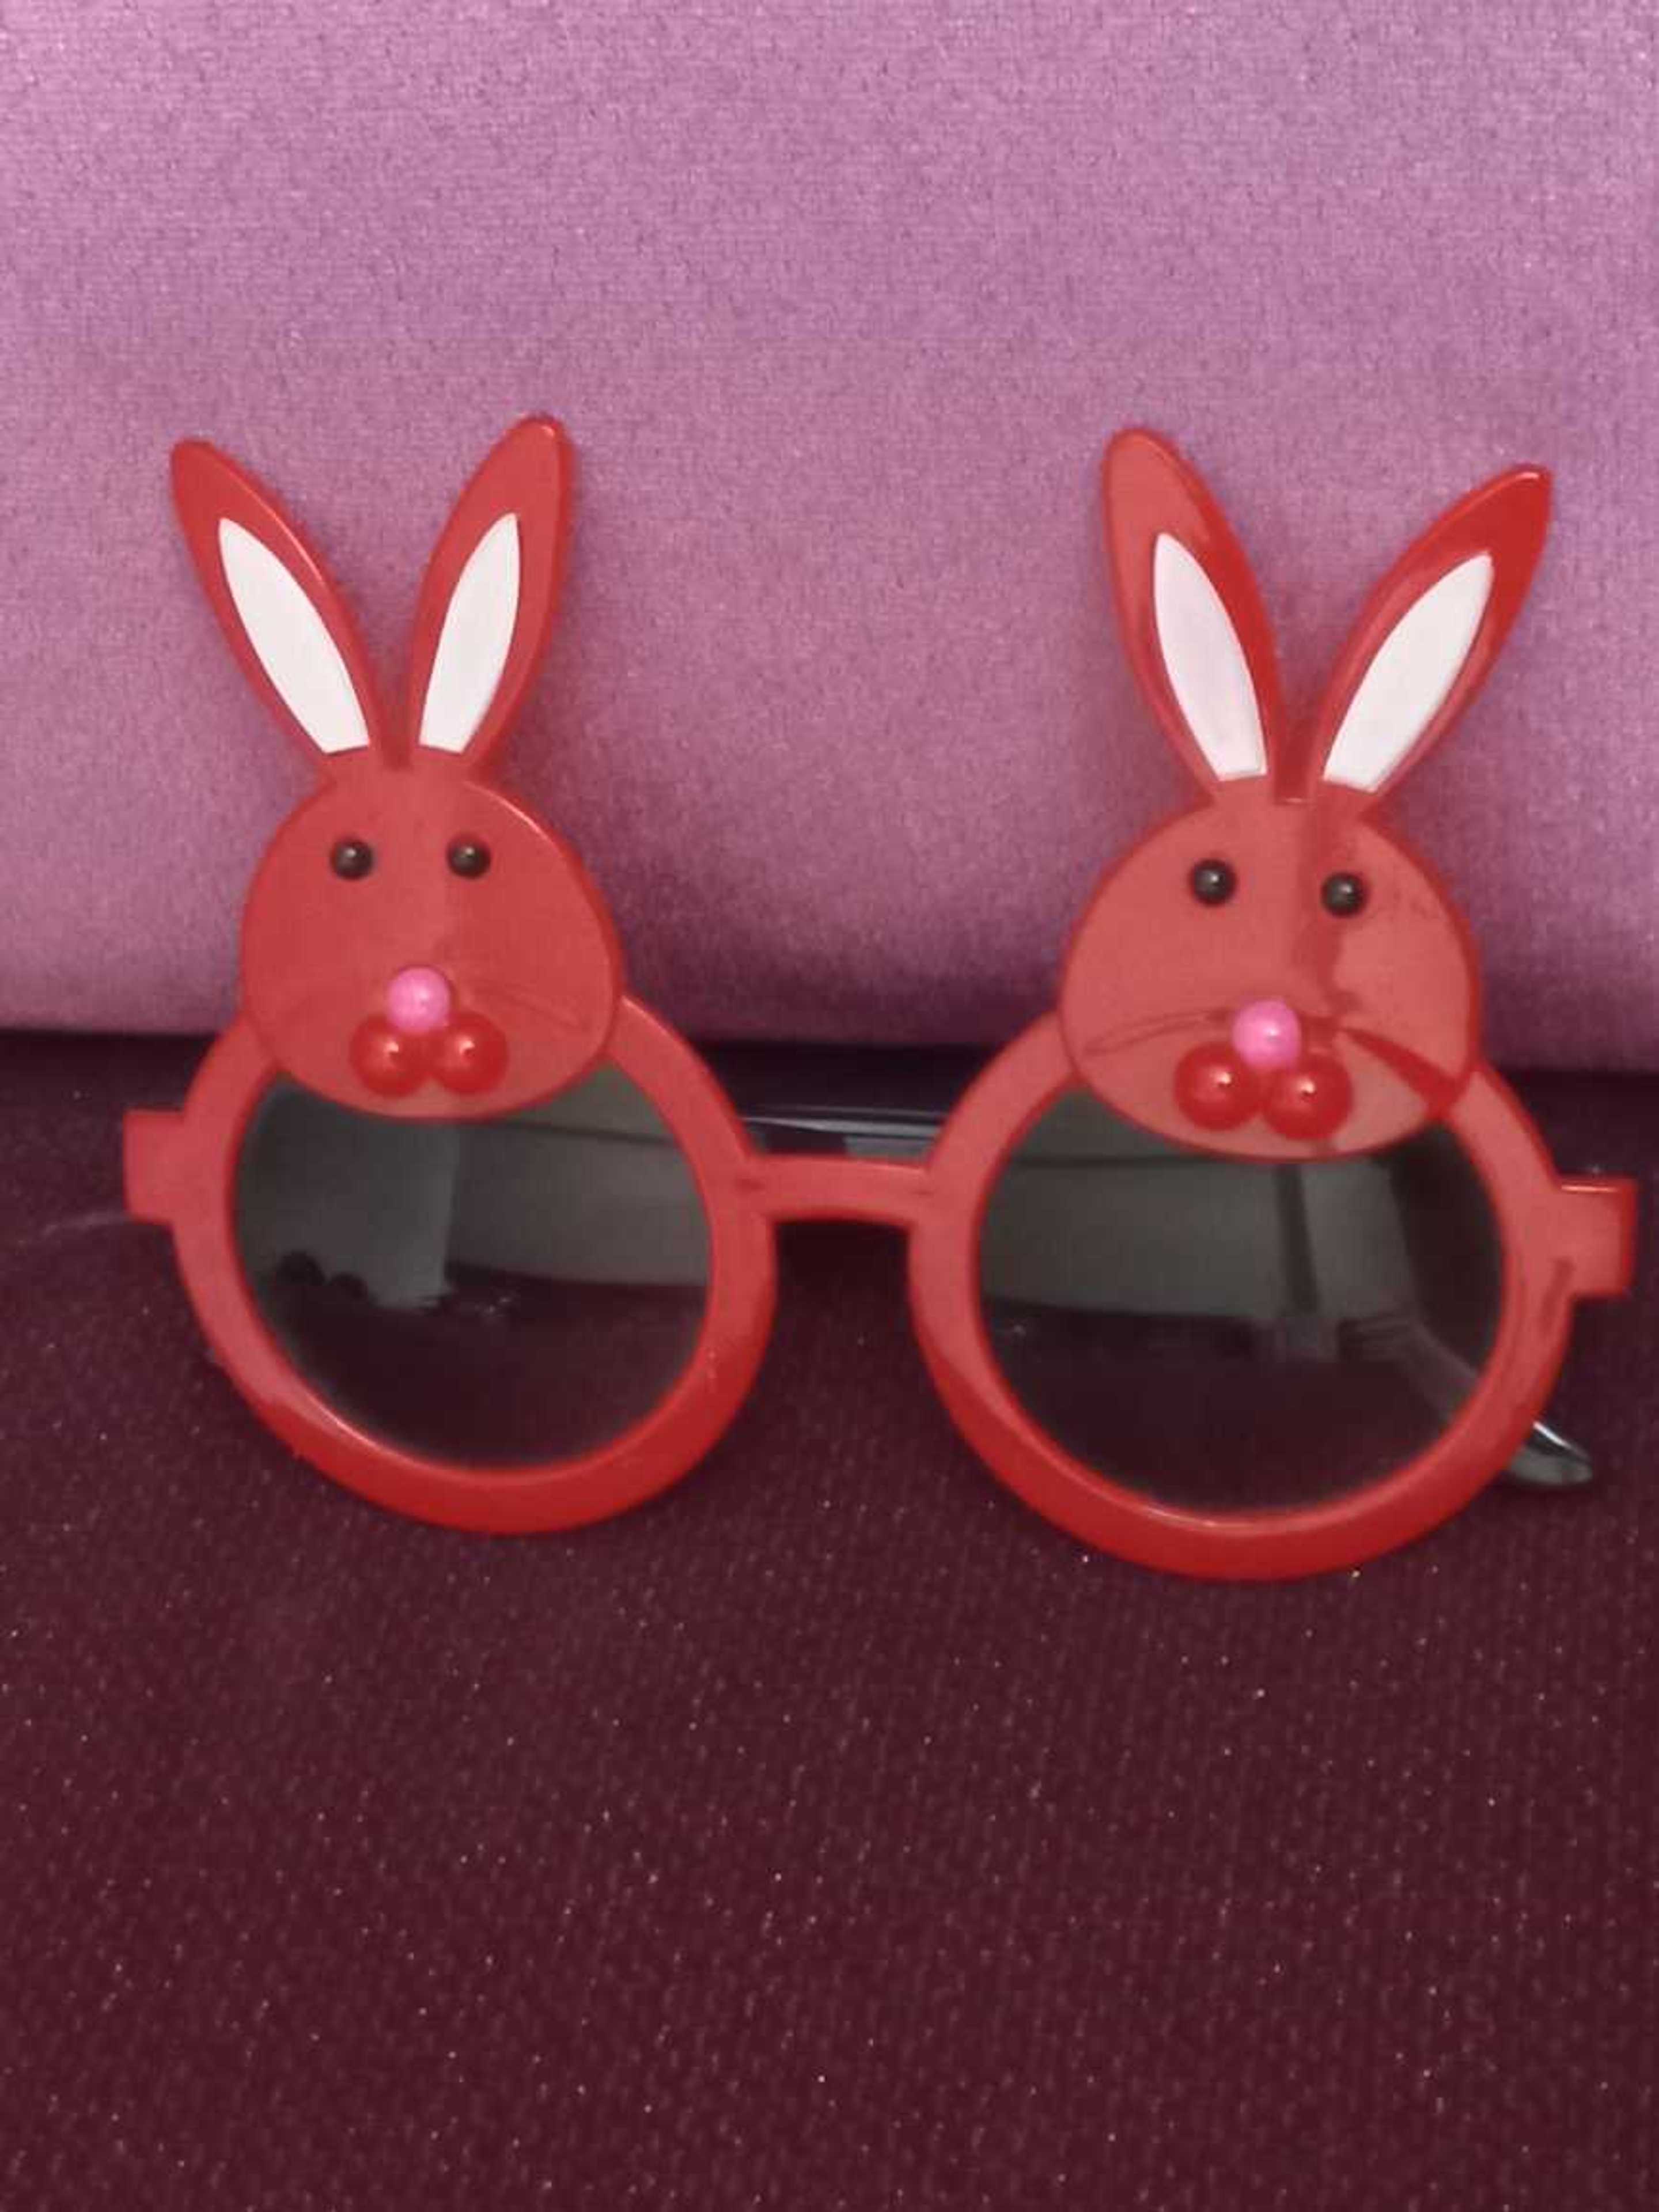 Bunny glasses available